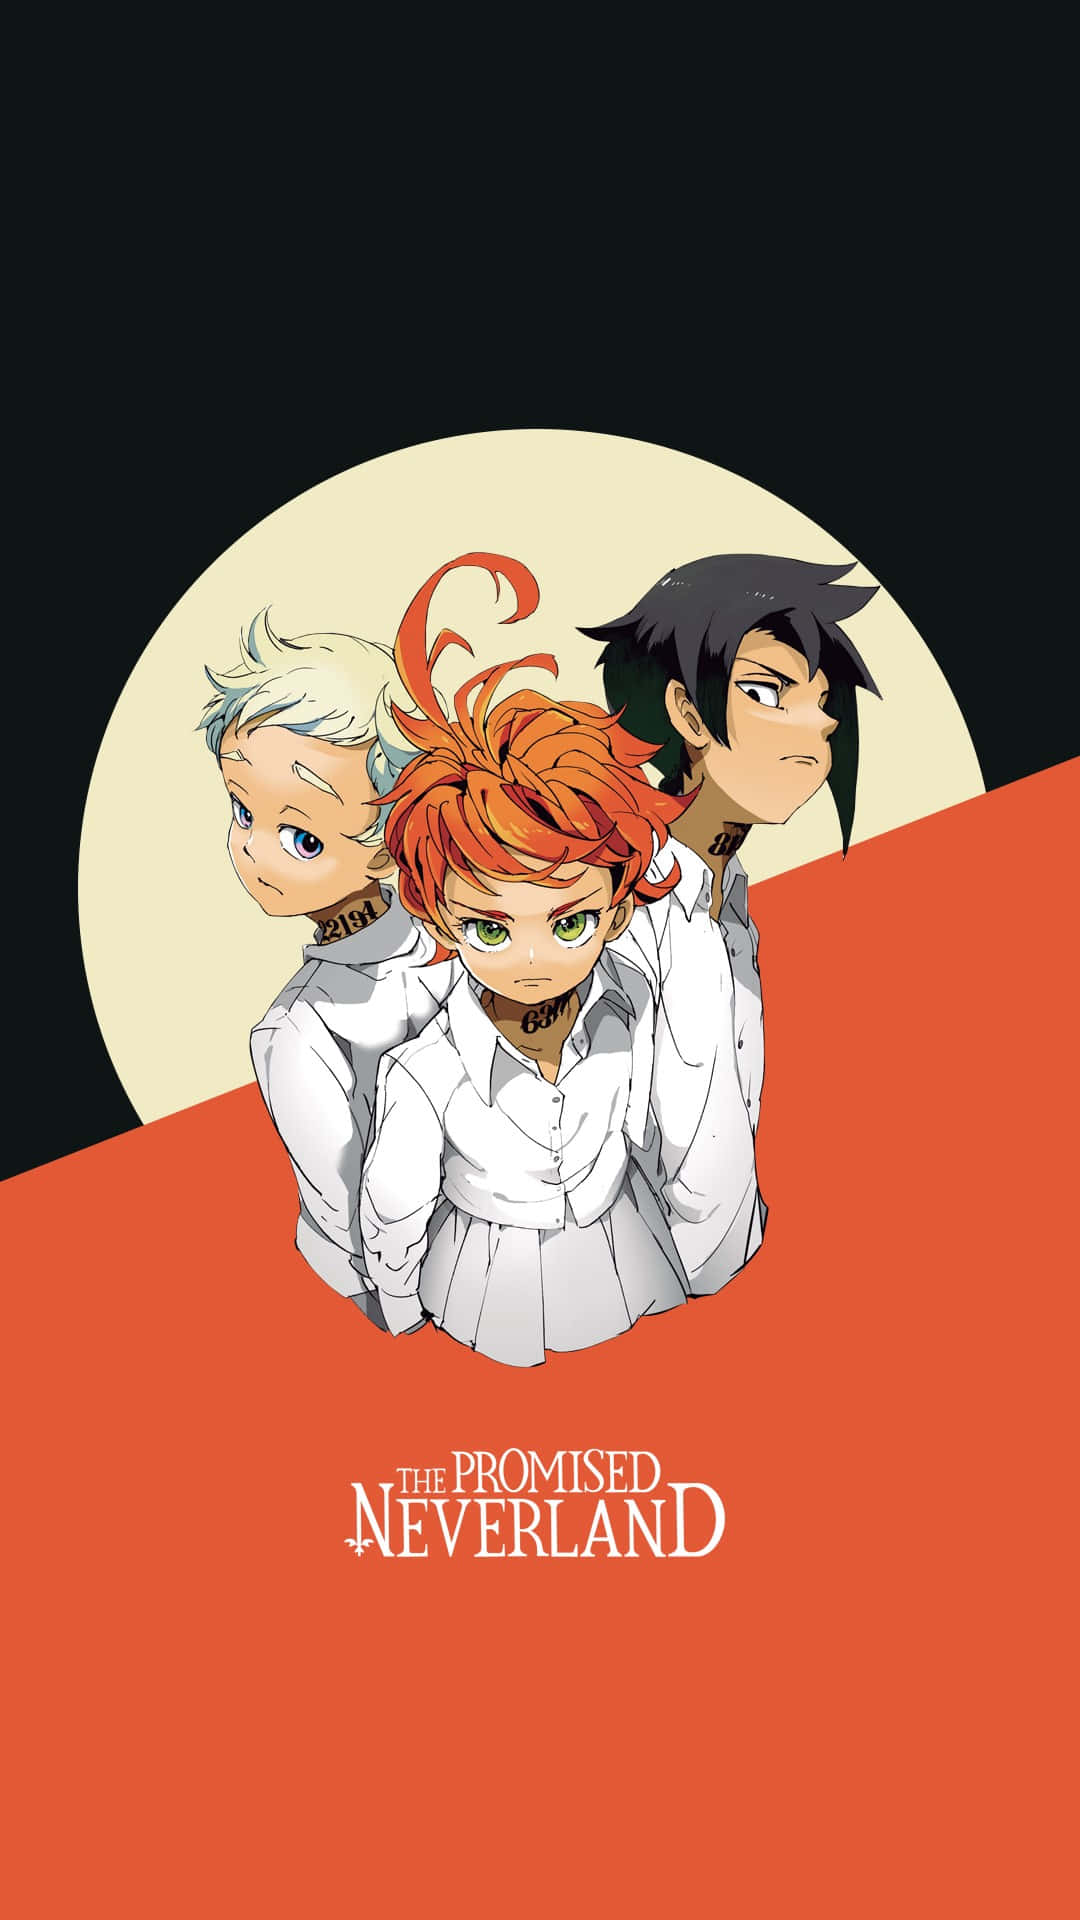 Download The Promised Neverland Ray 1080 X 1920 Wallpaper Wallpaper 